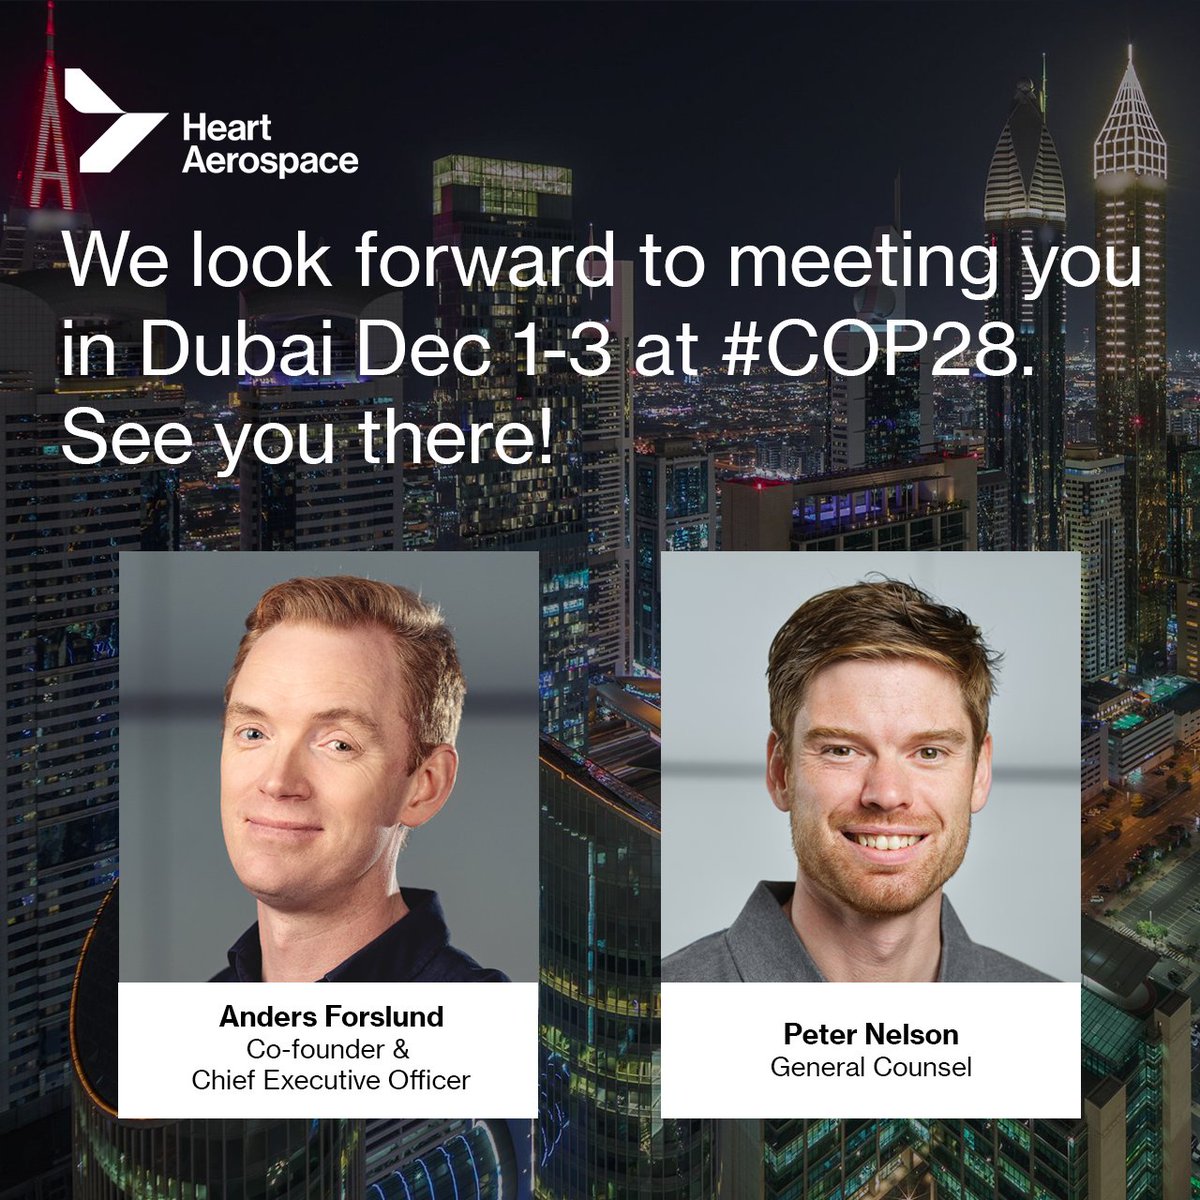 Will you be at #COP28? Heart Aerospace's Co-founder and CEO, Anders Forslund, and General Counsel, Peter Nelson, would love to meet up.

#aerospace #sustainable #sustainableaviation #electric #electricaircraft #climateaction